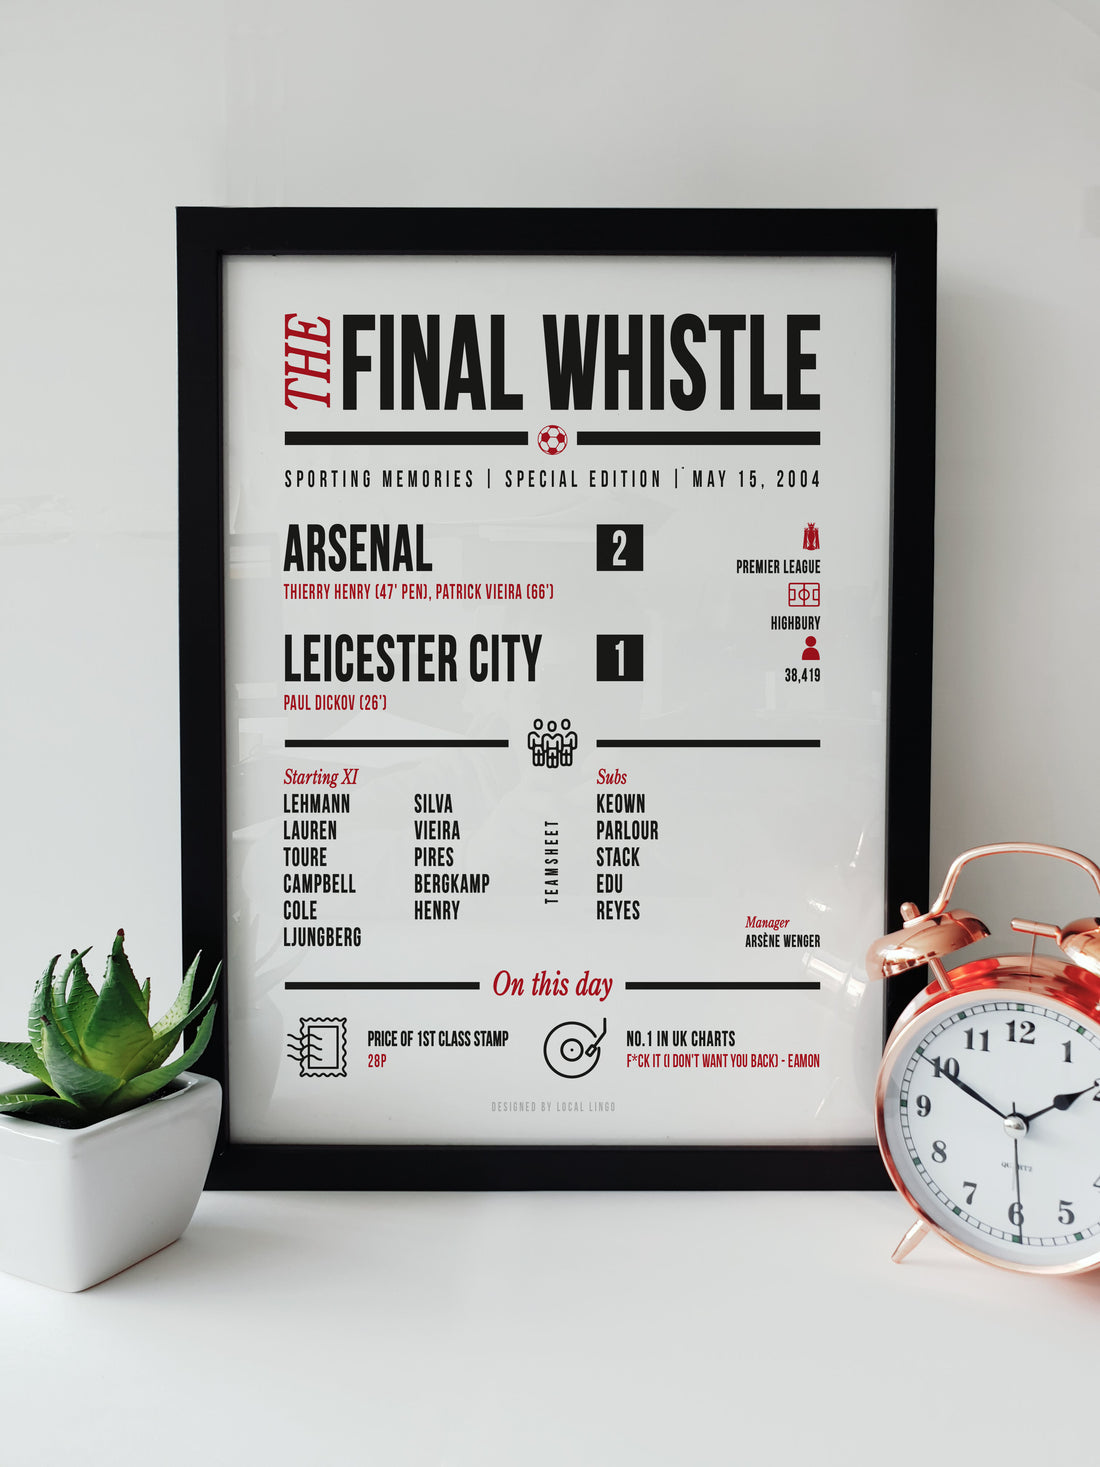 Exclusive print from The Final Whistle collection, commemorating Arsenal's unbeaten 2003-2004 season finale, complete with cultural icons of the day.